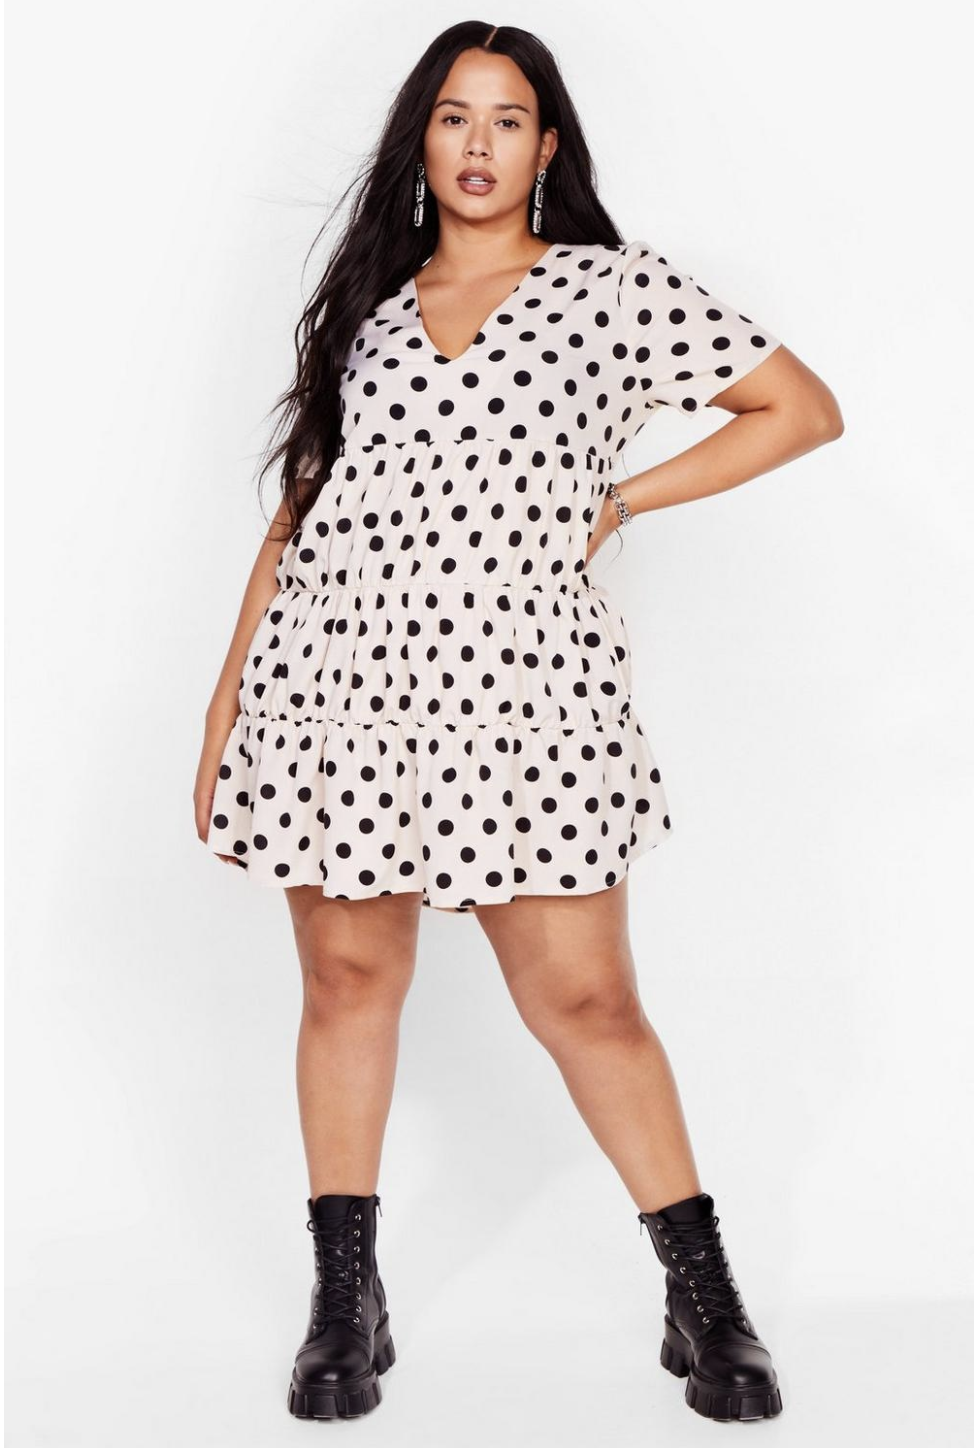 Nasty Gal Is Having A 50% Off Sale! Here Are 16 Of The Best Deals